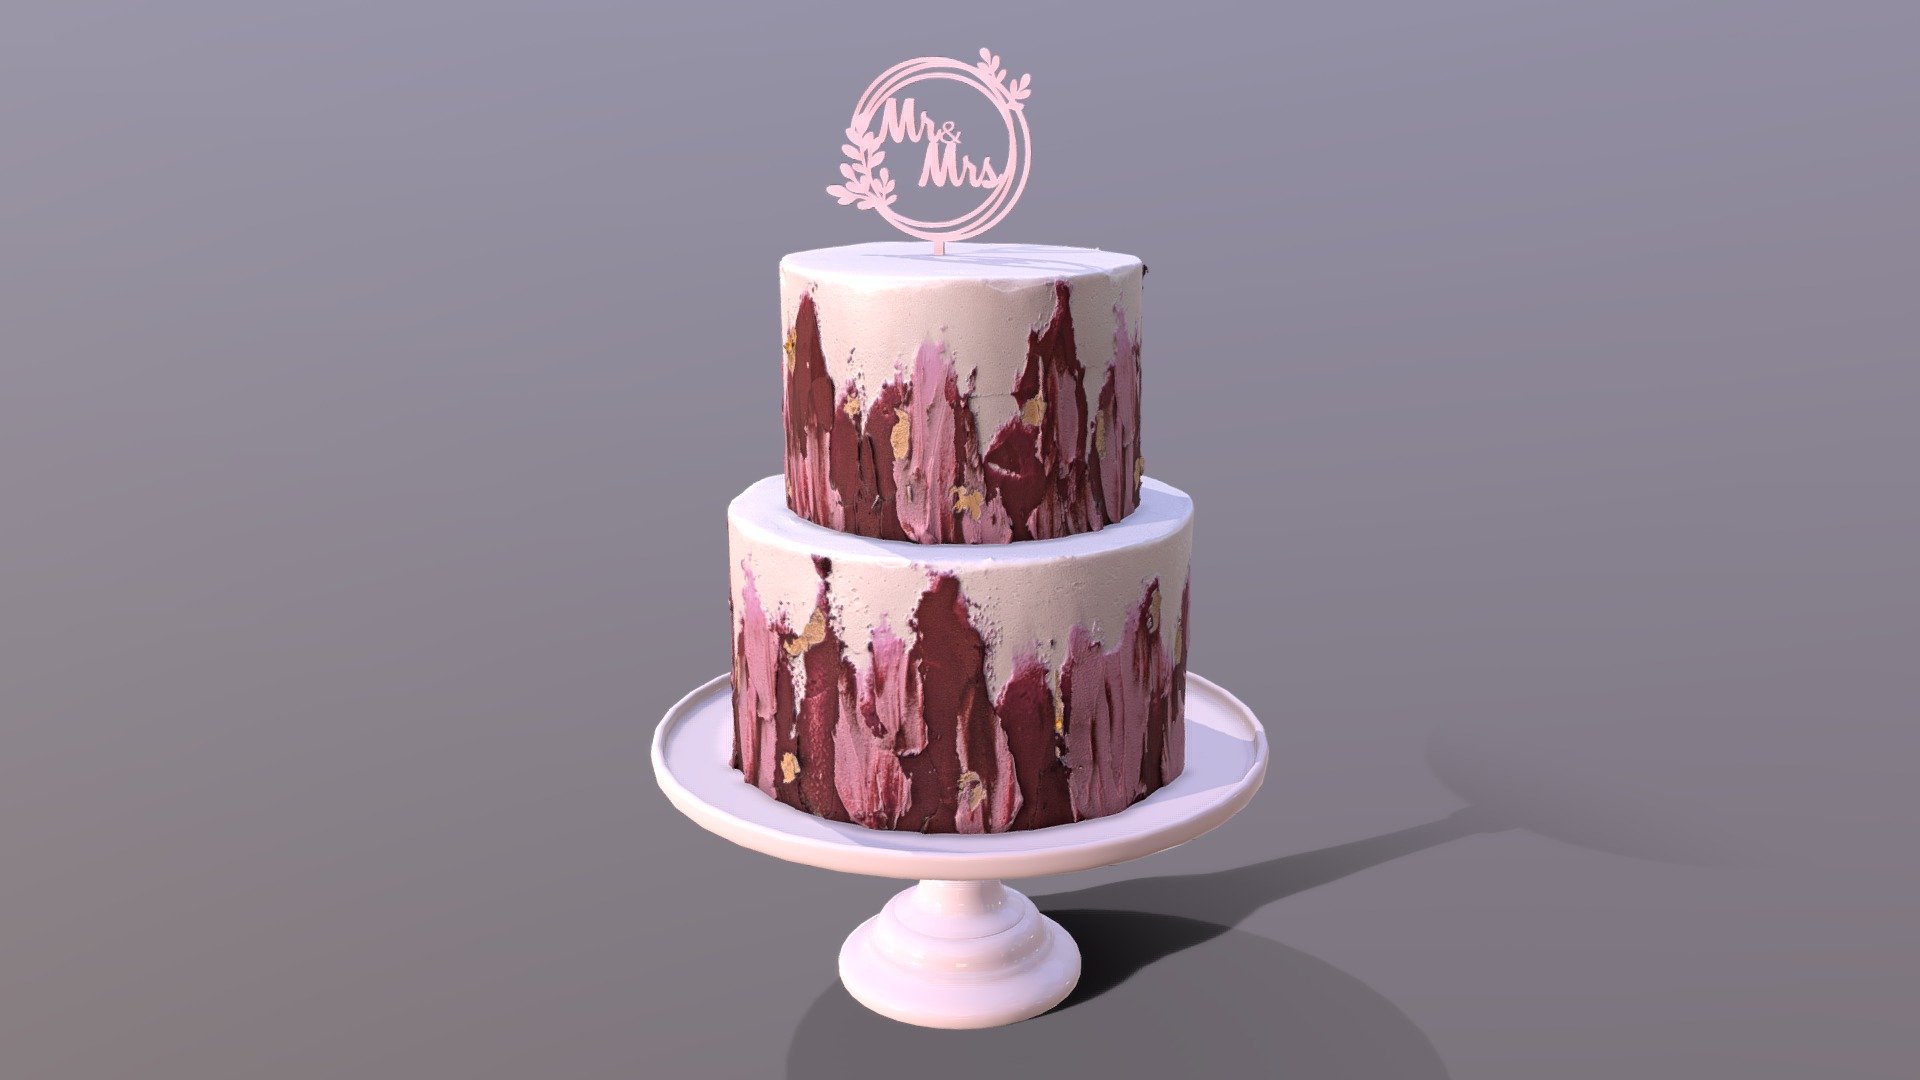 3D scan of an elegant Hibiscus Wedding Cake on the Mosser glass stand which is made by CAKESBURG Online Premium Cake Shop in UK. You can also order real cake from this link: https://cakesburg.co.uk/products/elegant-silky-naked-cake?_pos=1&amp;_sid=075fc6f3e&amp;_ss=r

Textures 4096*4096px PBR photoscan-based materials Base Color, Normal, Roughness, Specular, AO) - Elegant Hibiscus Wedding Cake - Buy Royalty Free 3D model by Cakesburg Premium 3D Cake Shop (@Viscom_Cakesburg) 3d model